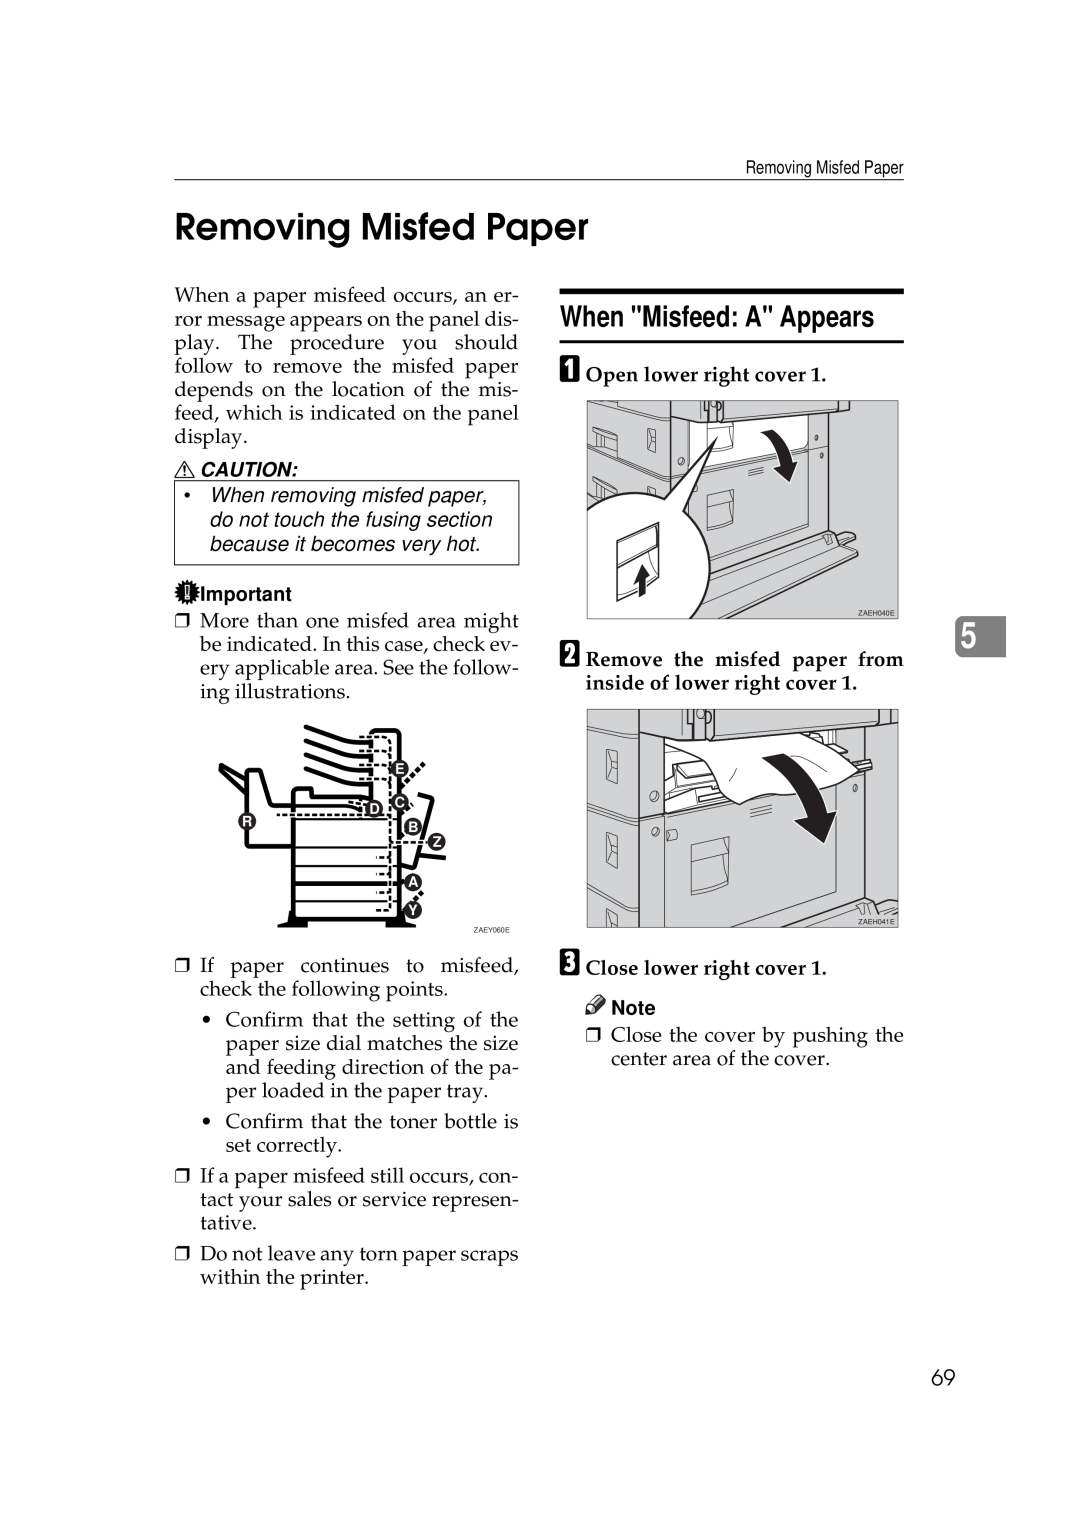 Ricoh Aficio AP2700 operating instructions Removing Misfed Paper, When Misfeed A Appears 